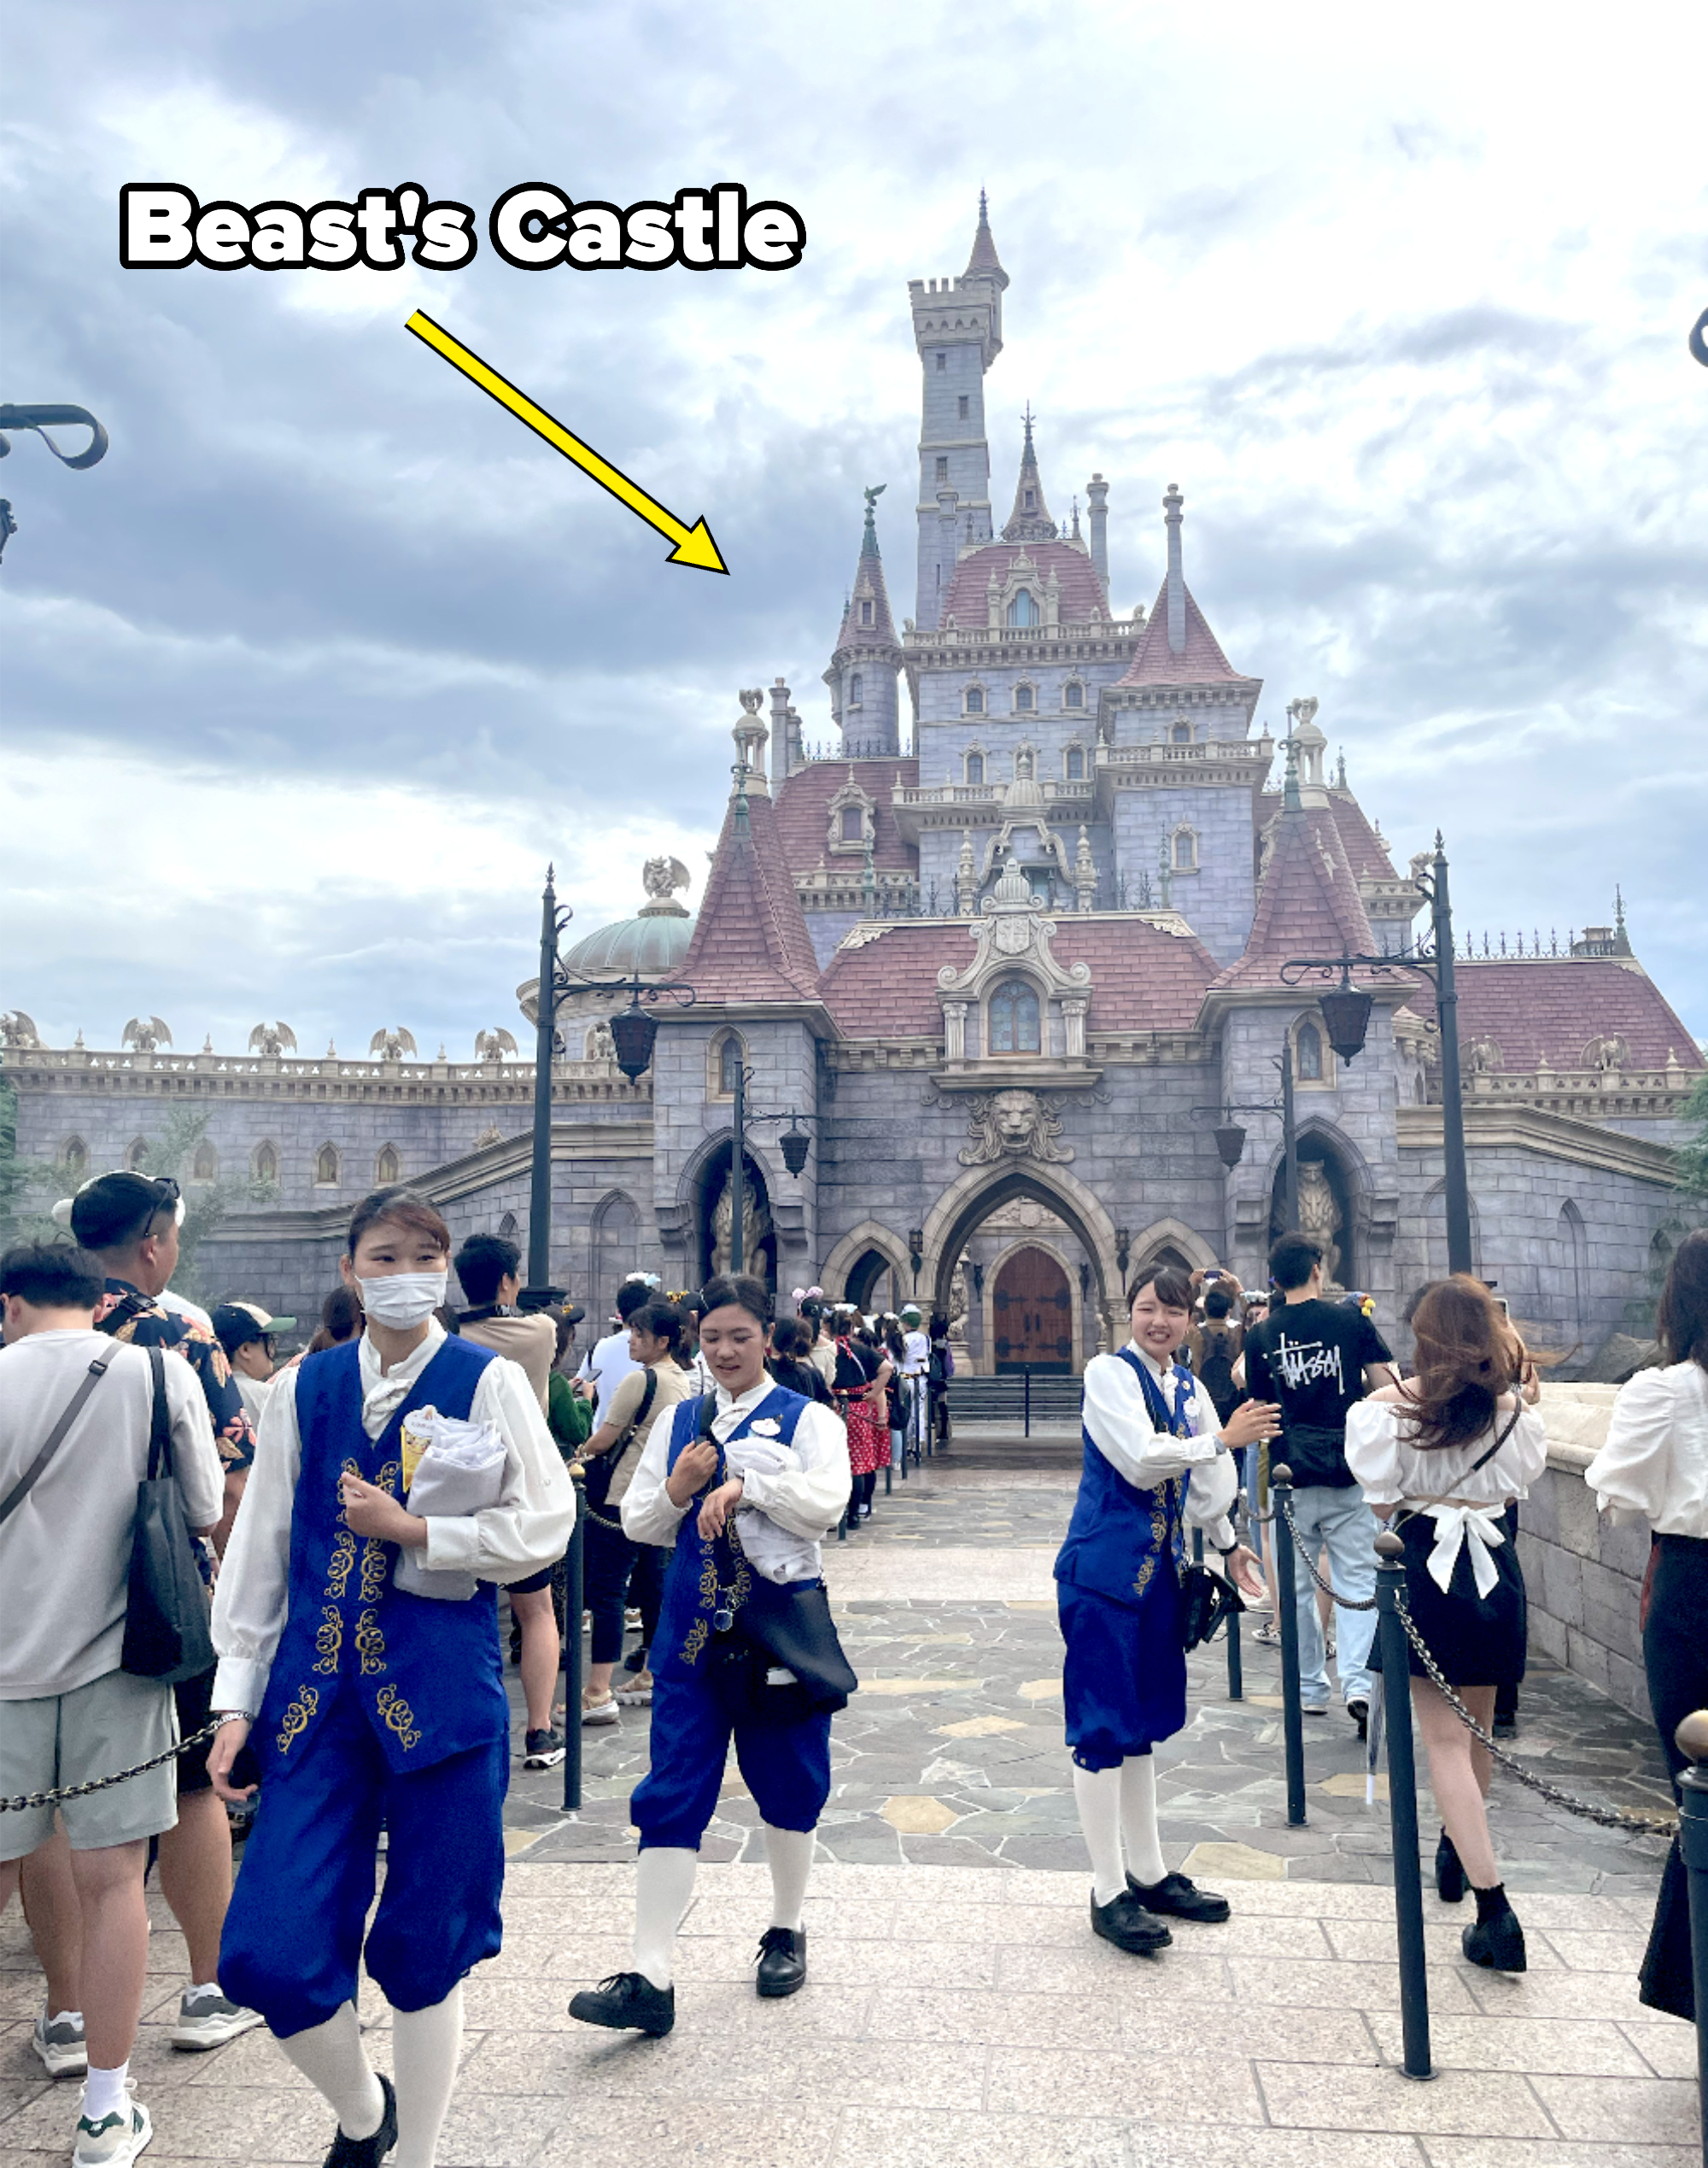 People dressed as Disney cast members in themed uniforms stand in front of the Beast&#x27;s Castle at Tokyo Disneyland, surrounded by visitors